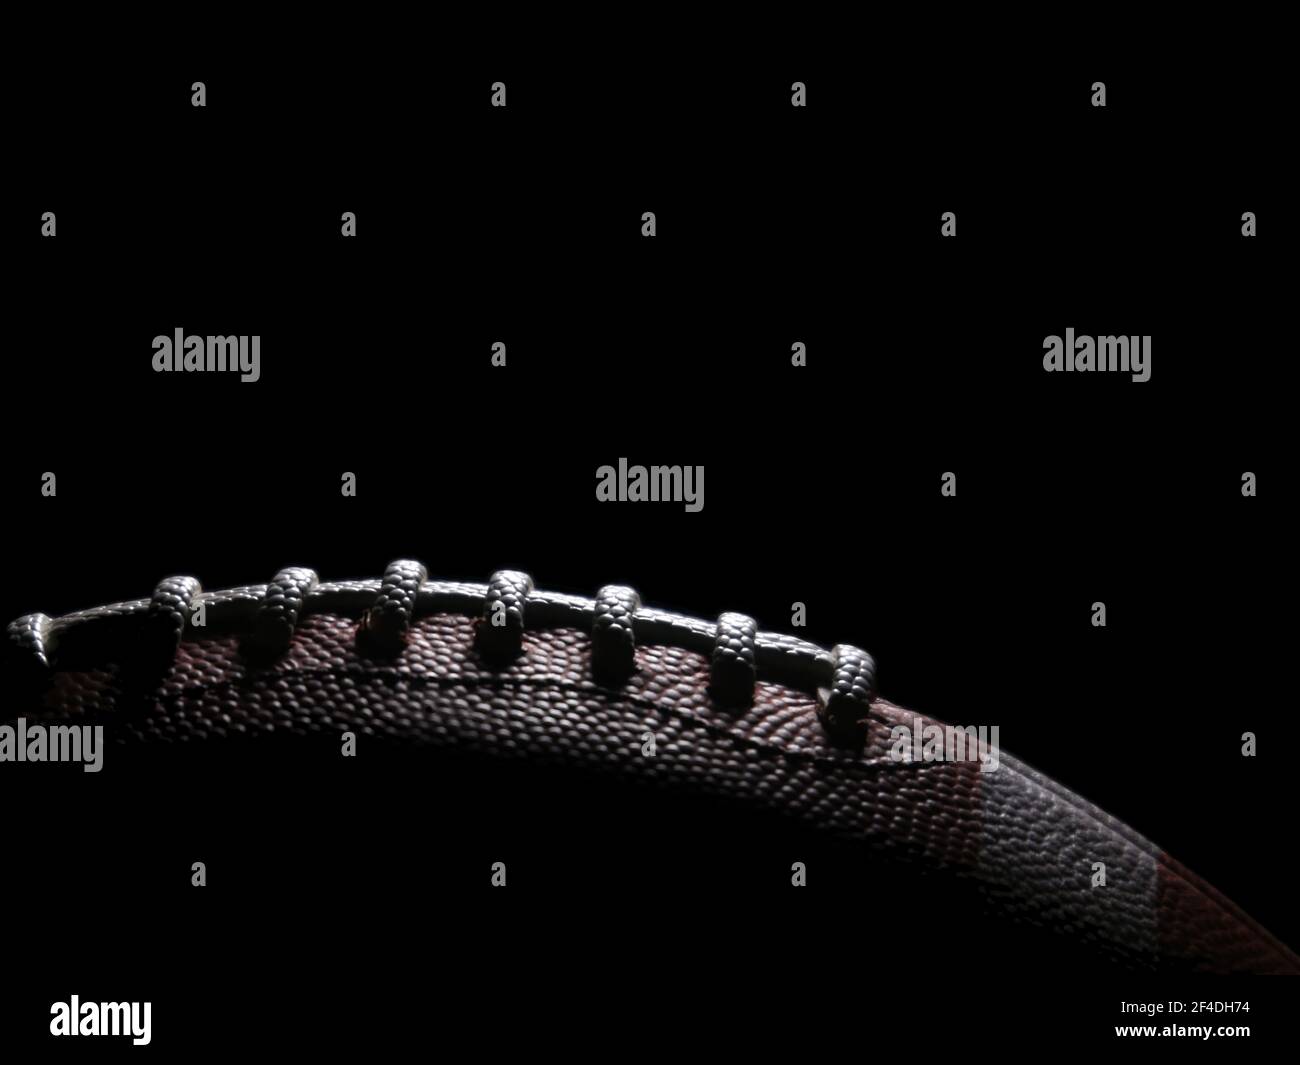 An American football game ball is lit from above from a single light source and set against a black background, with text space above. Stock Photo